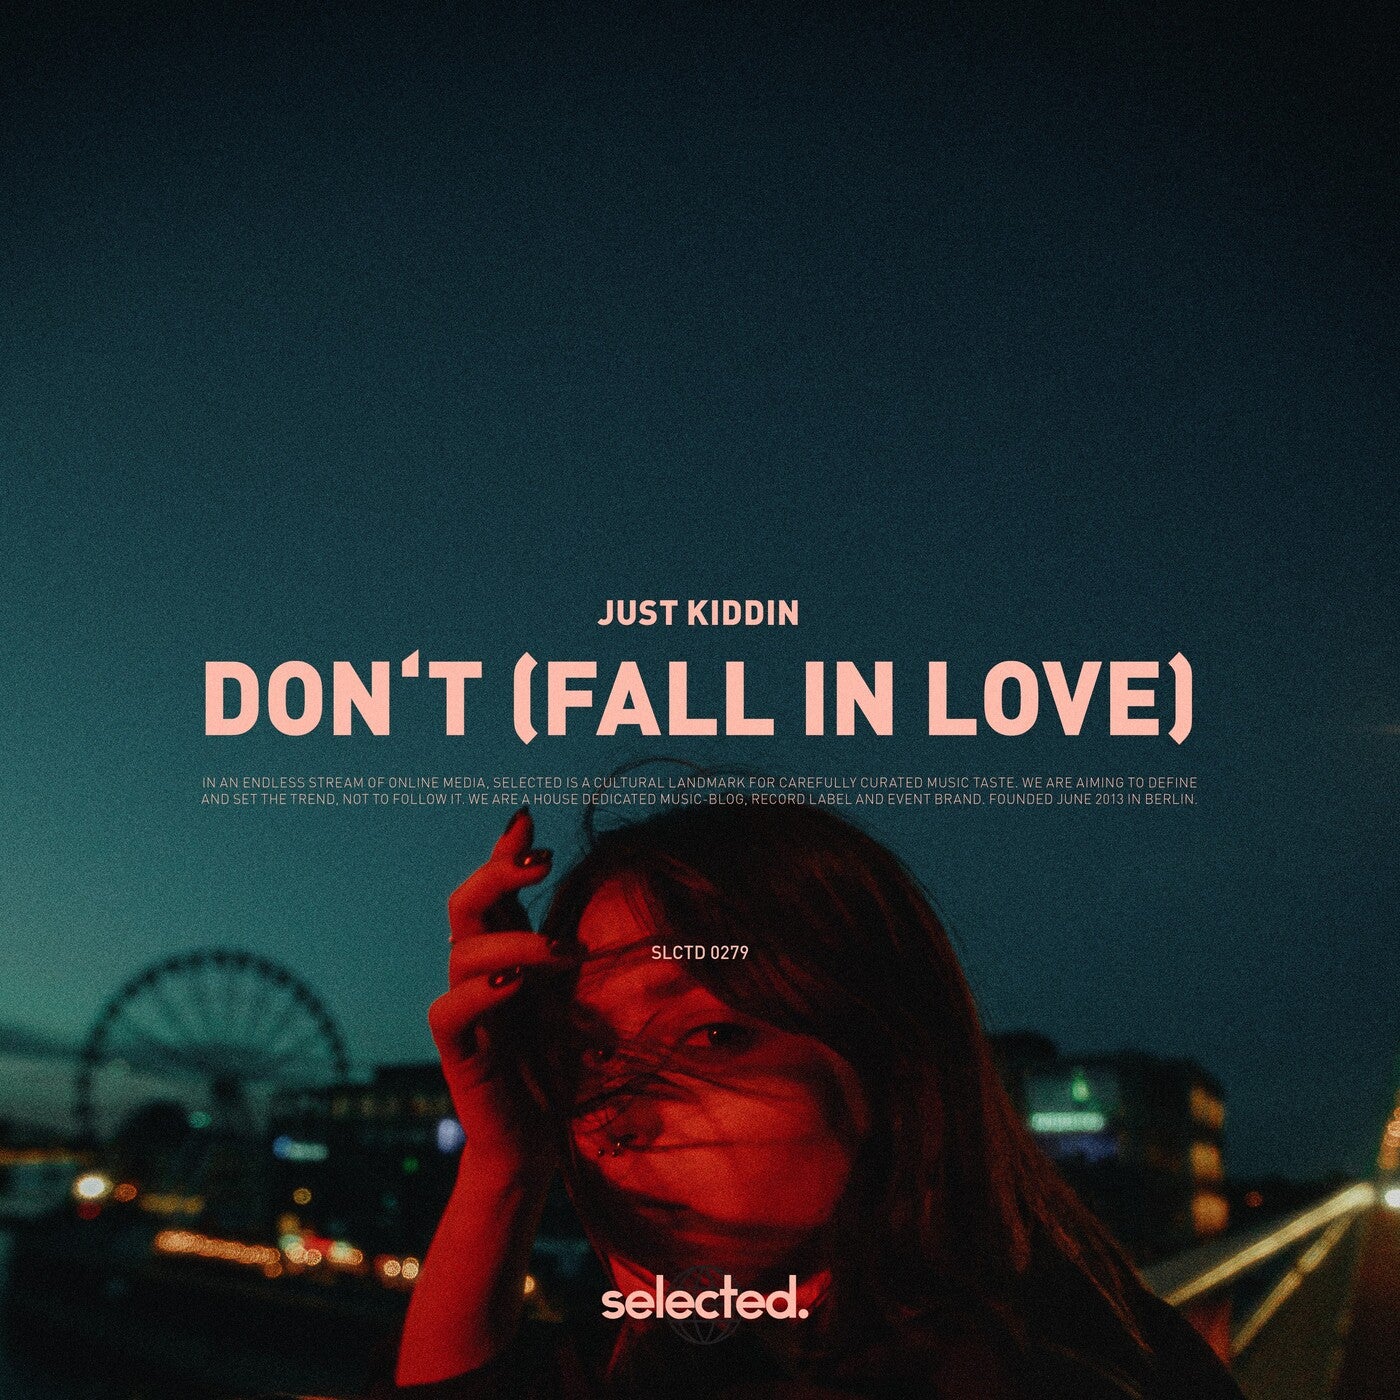 Don't (Fall in Love)